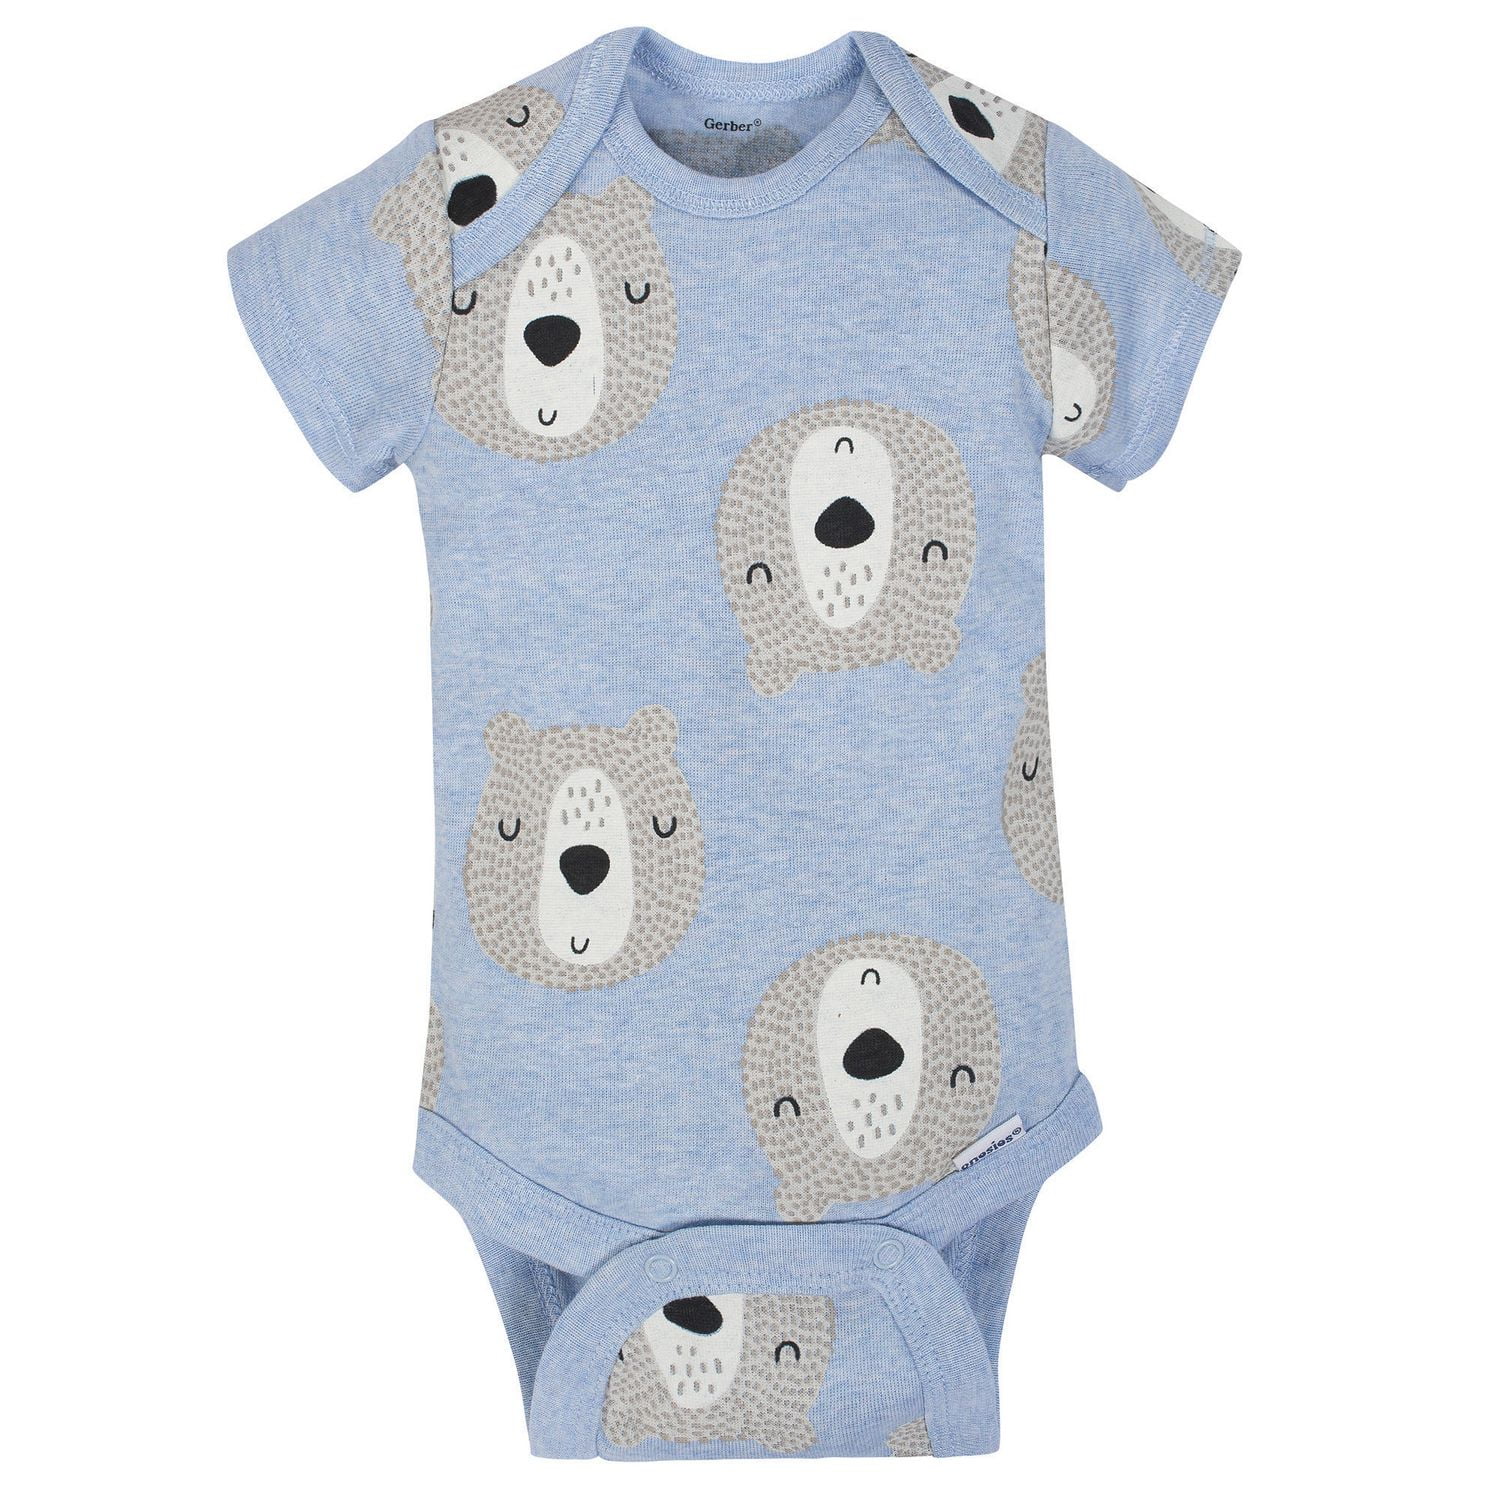 Cotton Baby Onesies: Home to 3T onesies and more!